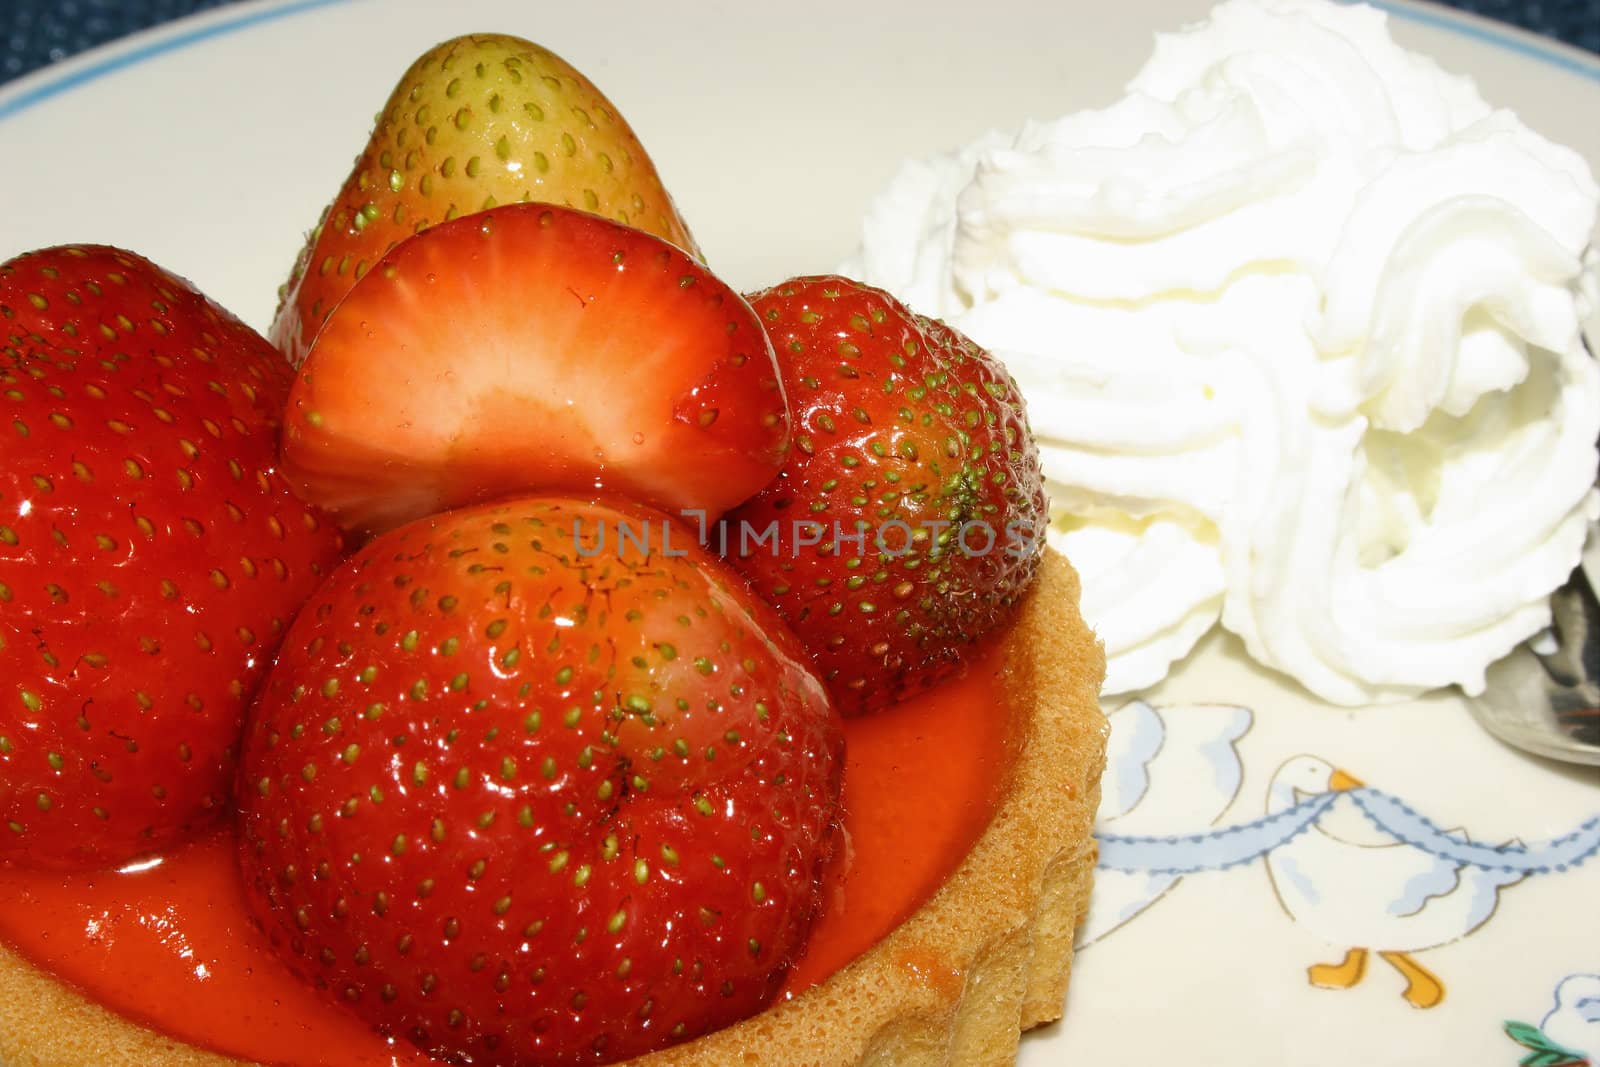 Strawberry tart with whipped cream